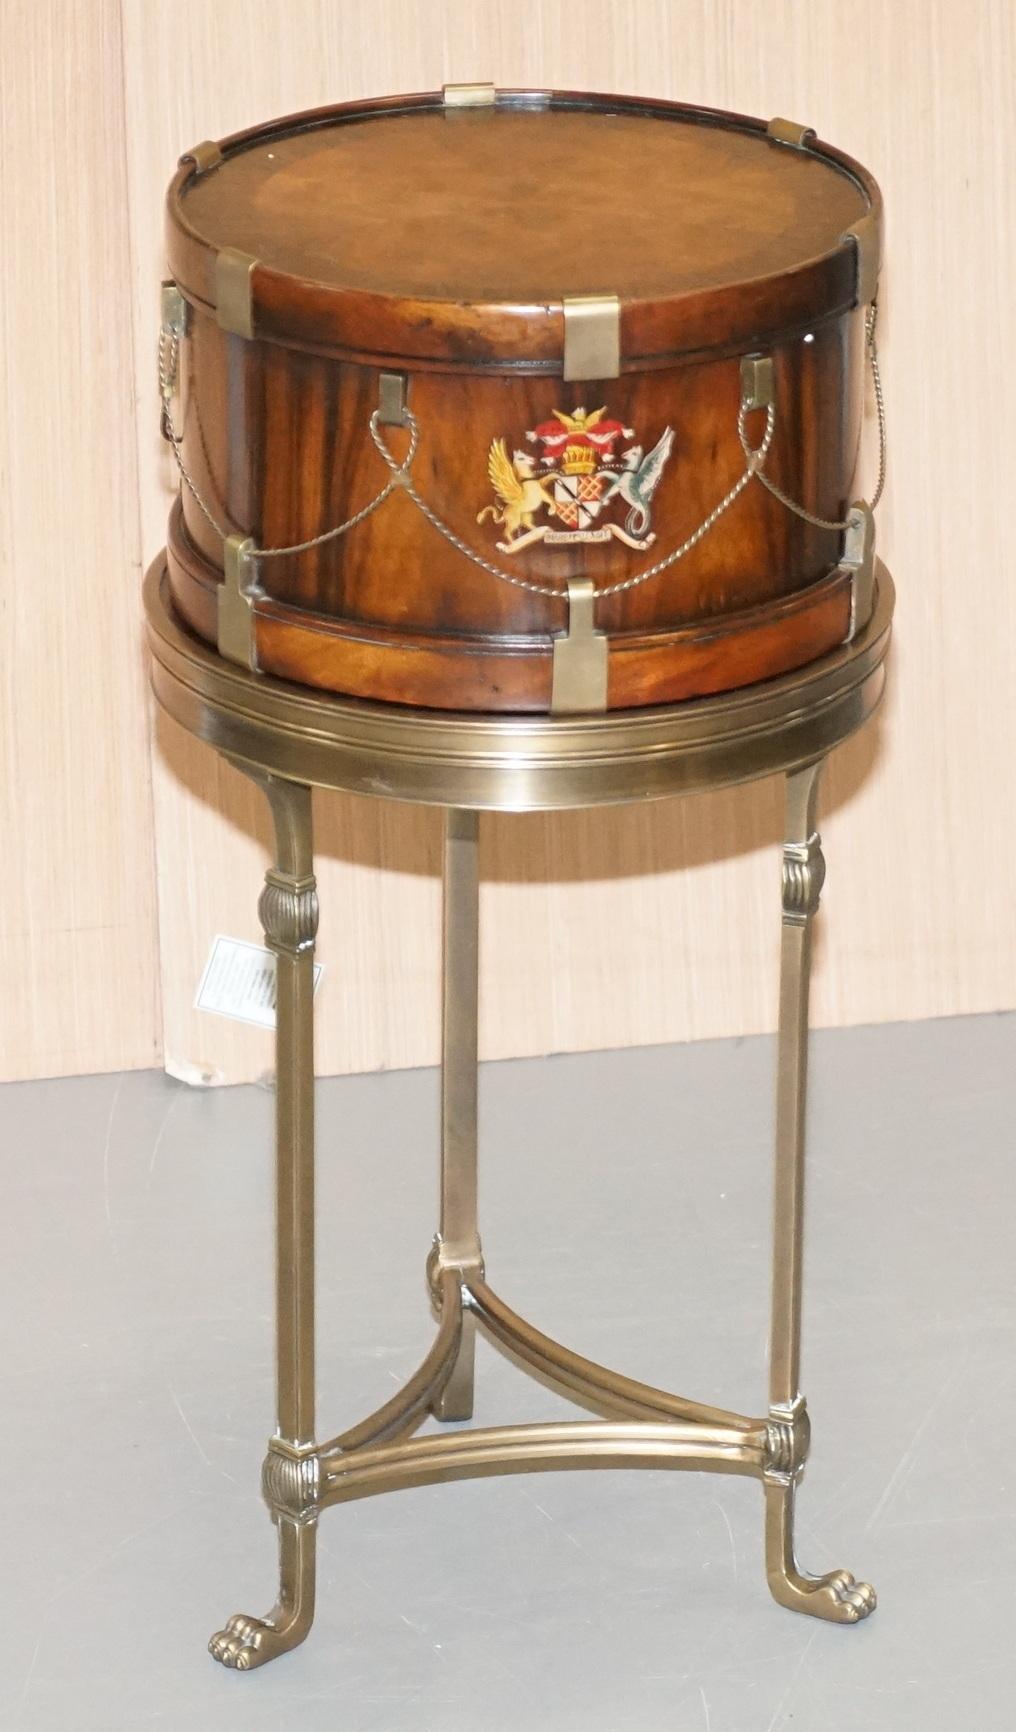 We are delighted to offer for sale this lovely walnut timber framed with bronzed stand drum table with internal storage and armorial crest in the form of an actual drum

This is a very good looking and decorative side table, it looks like a